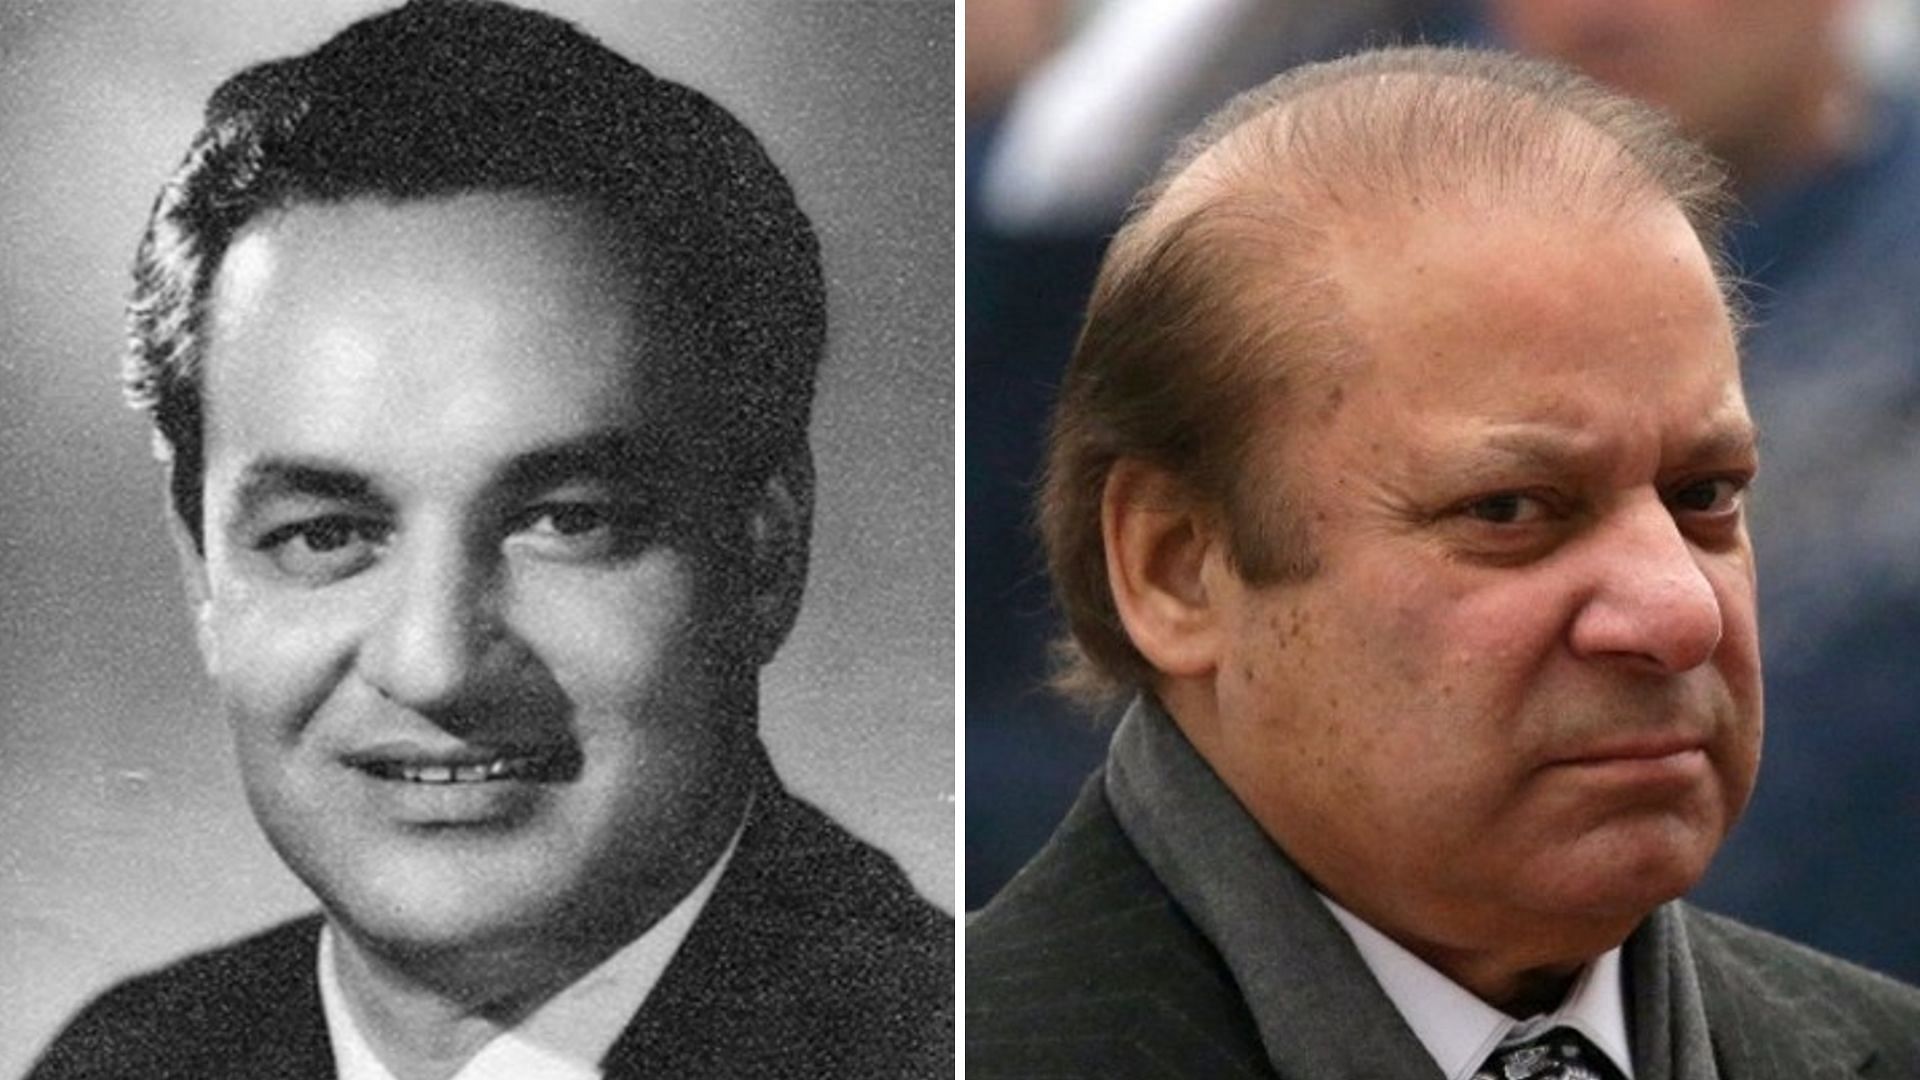 Pakistan Railways Minister Sheikh Rashid said  that the government should provide a tape recorder and a collection of songs by legendary Indian playback singer Mukesh to deposed prime minister Nawaz Sharif